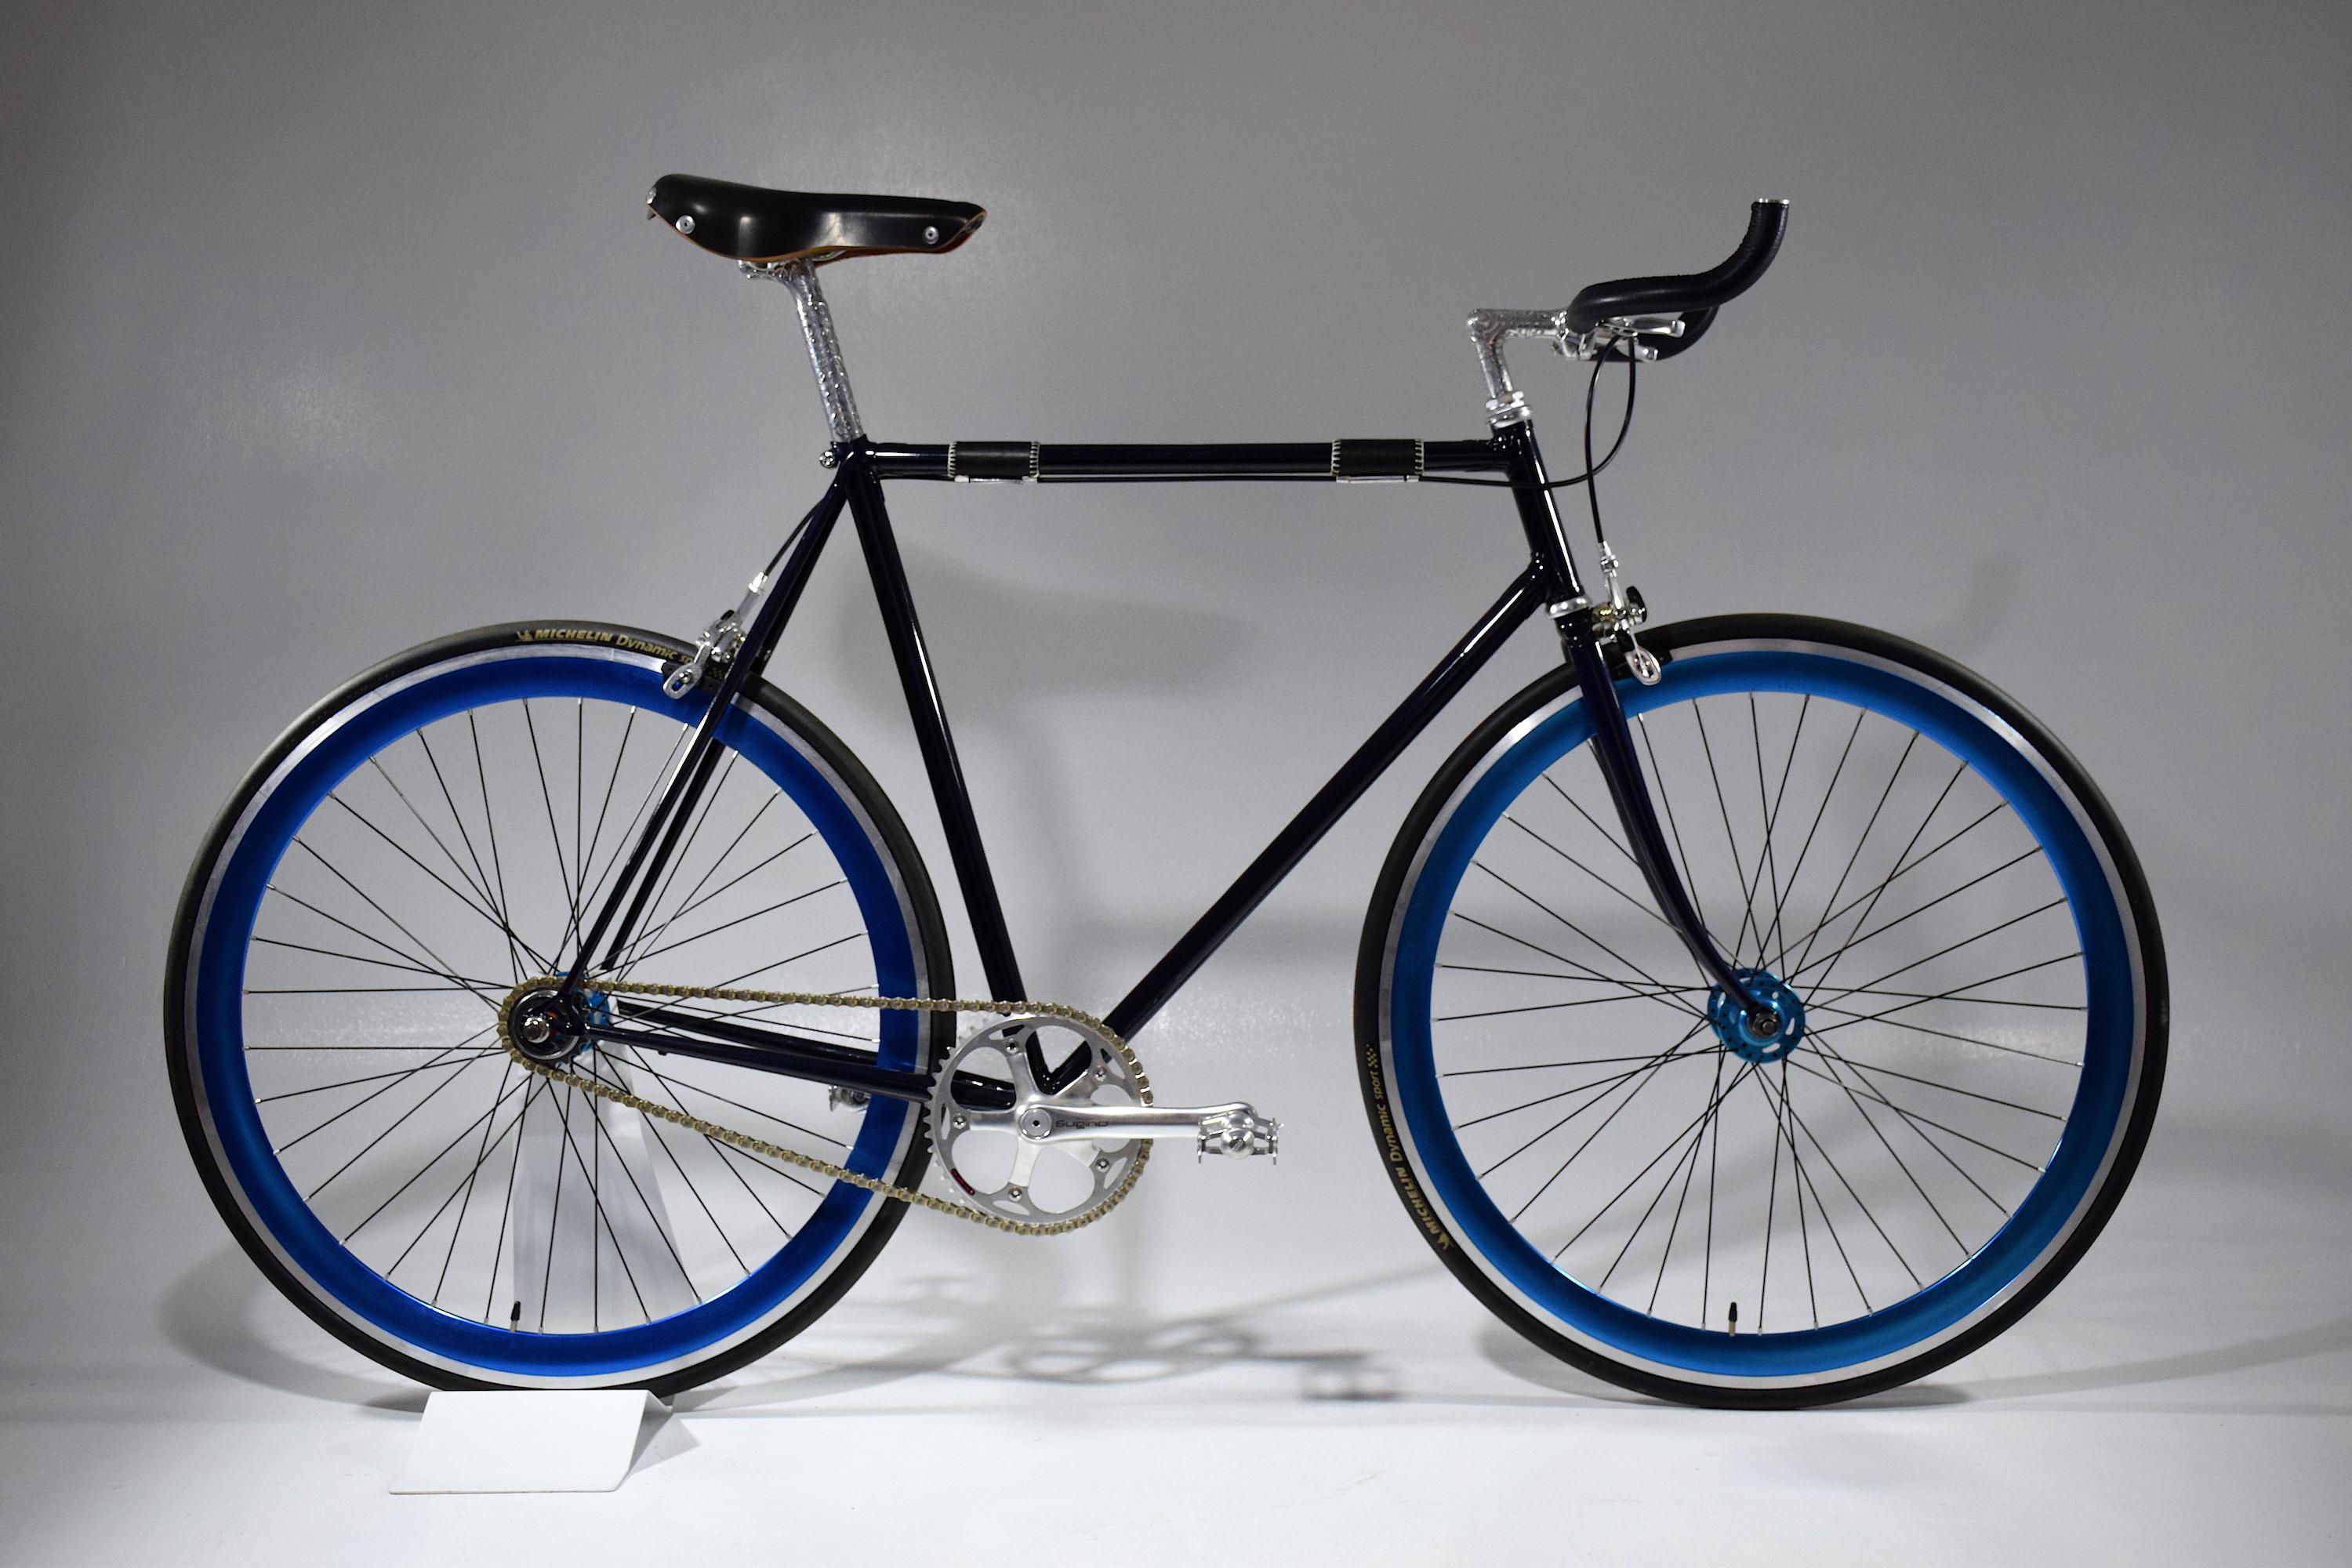 The ILA034 is a bespoke Singlespeed bicycle built with a vintage Reynolds steel frame and upcycled with our studio's artisan know-hows, new components, and quality materials.
All technical details are included in image 18.
Size: 56cm
Weight: 12.7